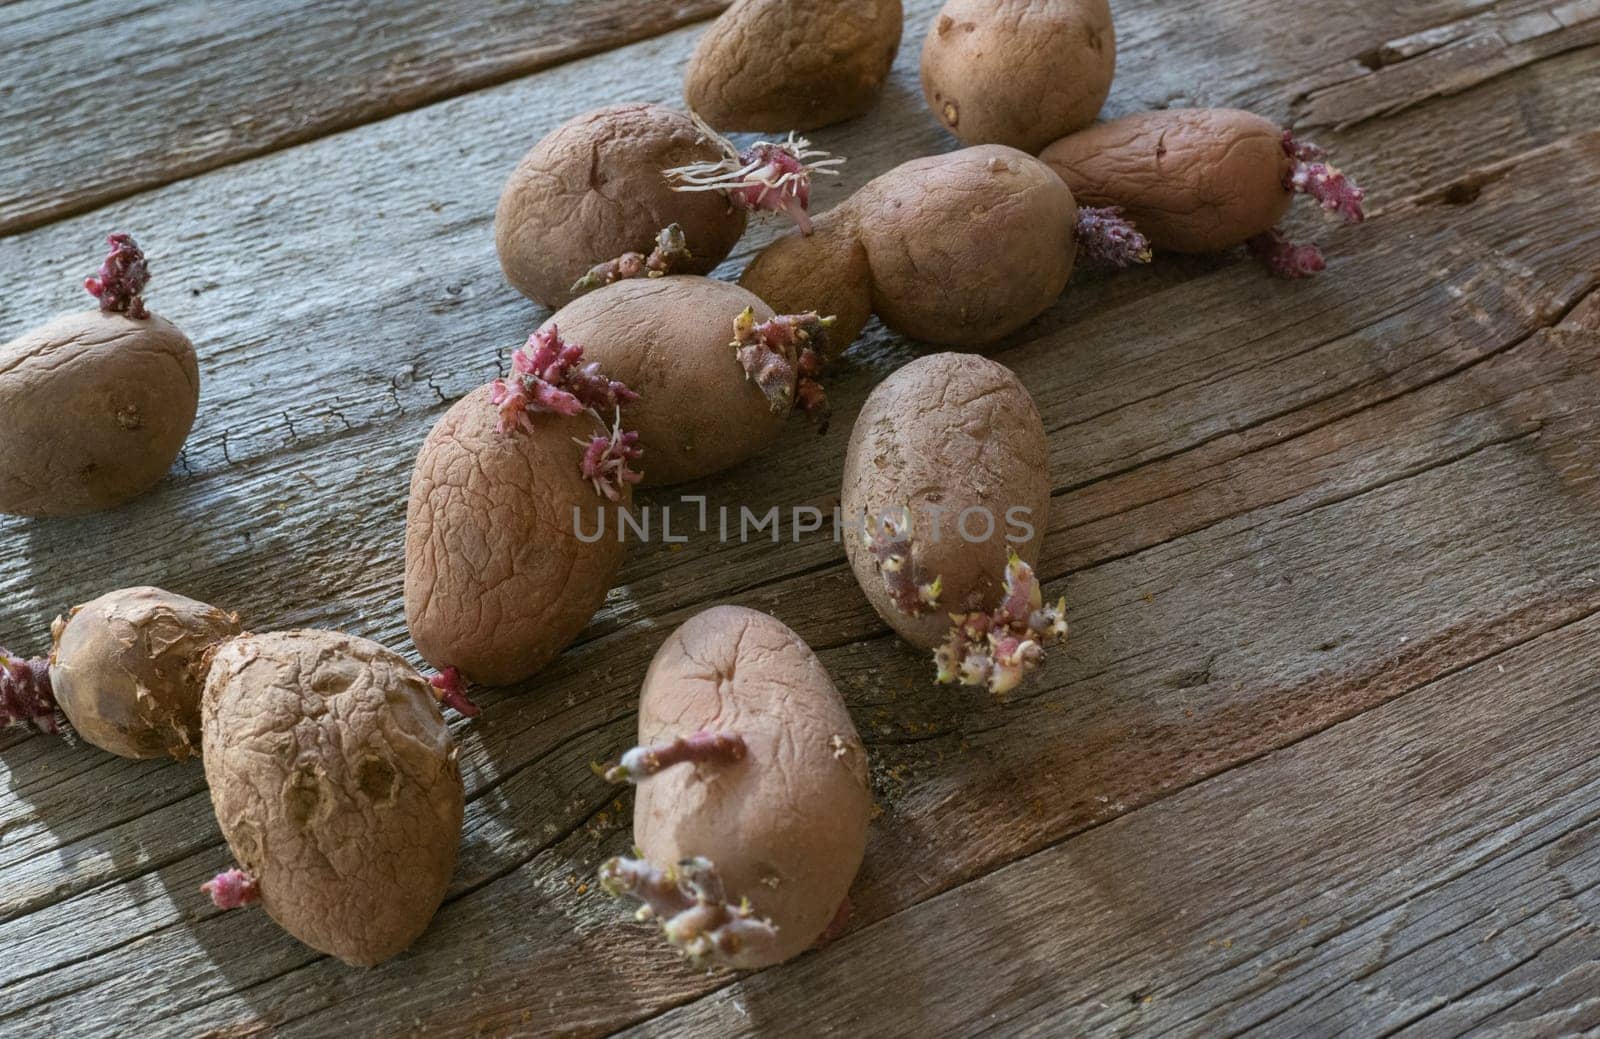 Potatoes with sprouts on a wooden background. Seed potatoes for planting